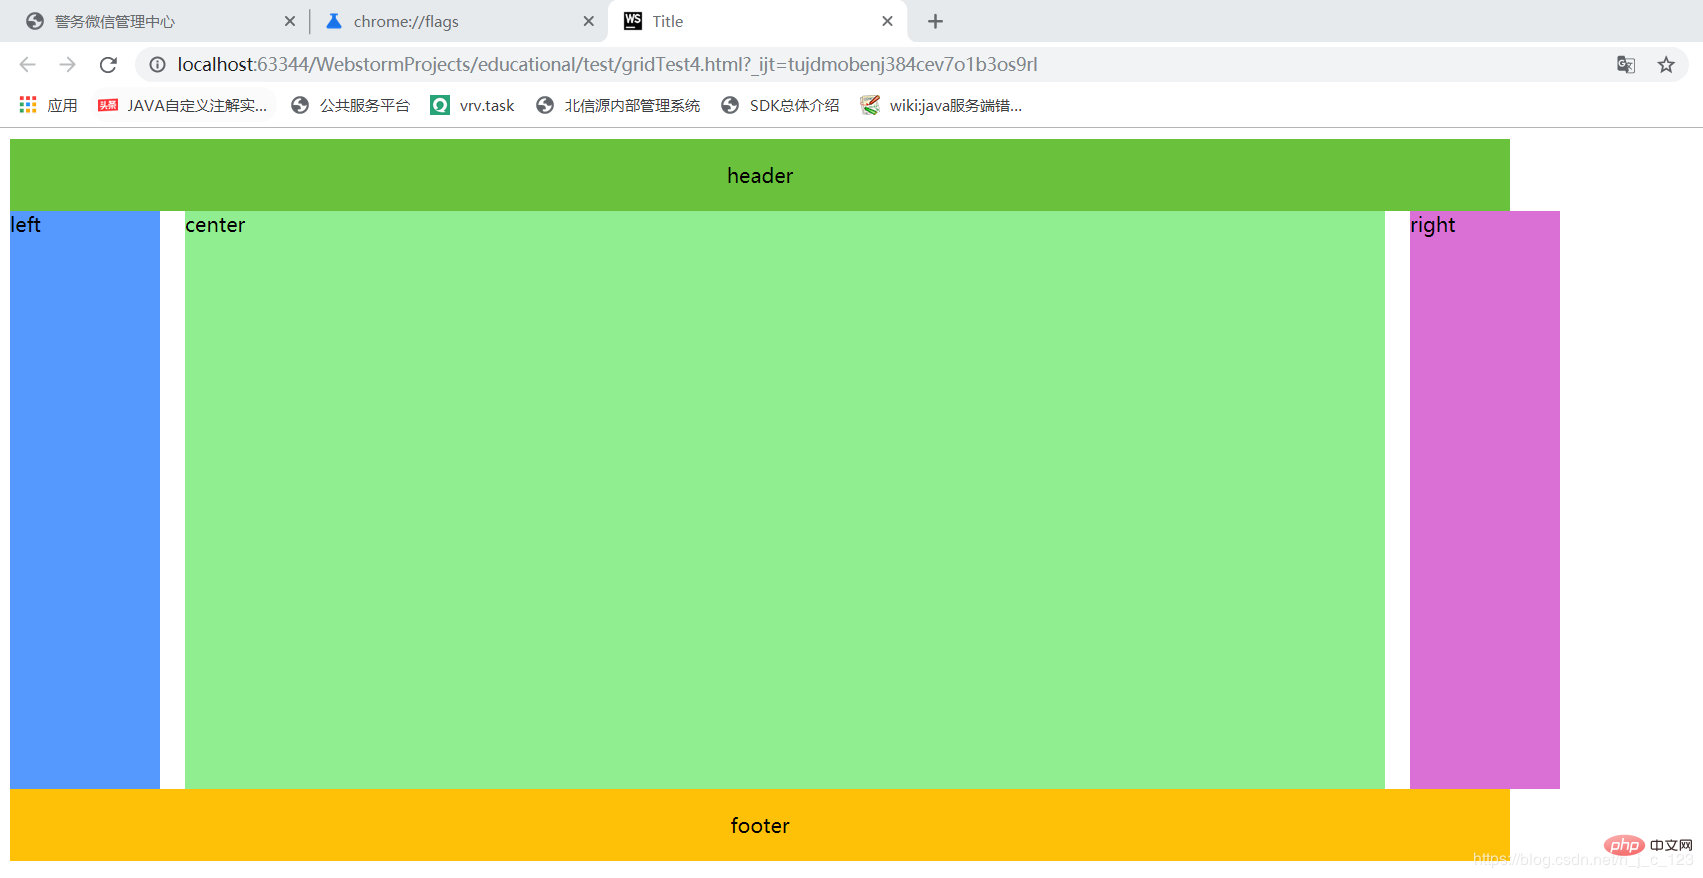 What are css grid layout and flex layout?